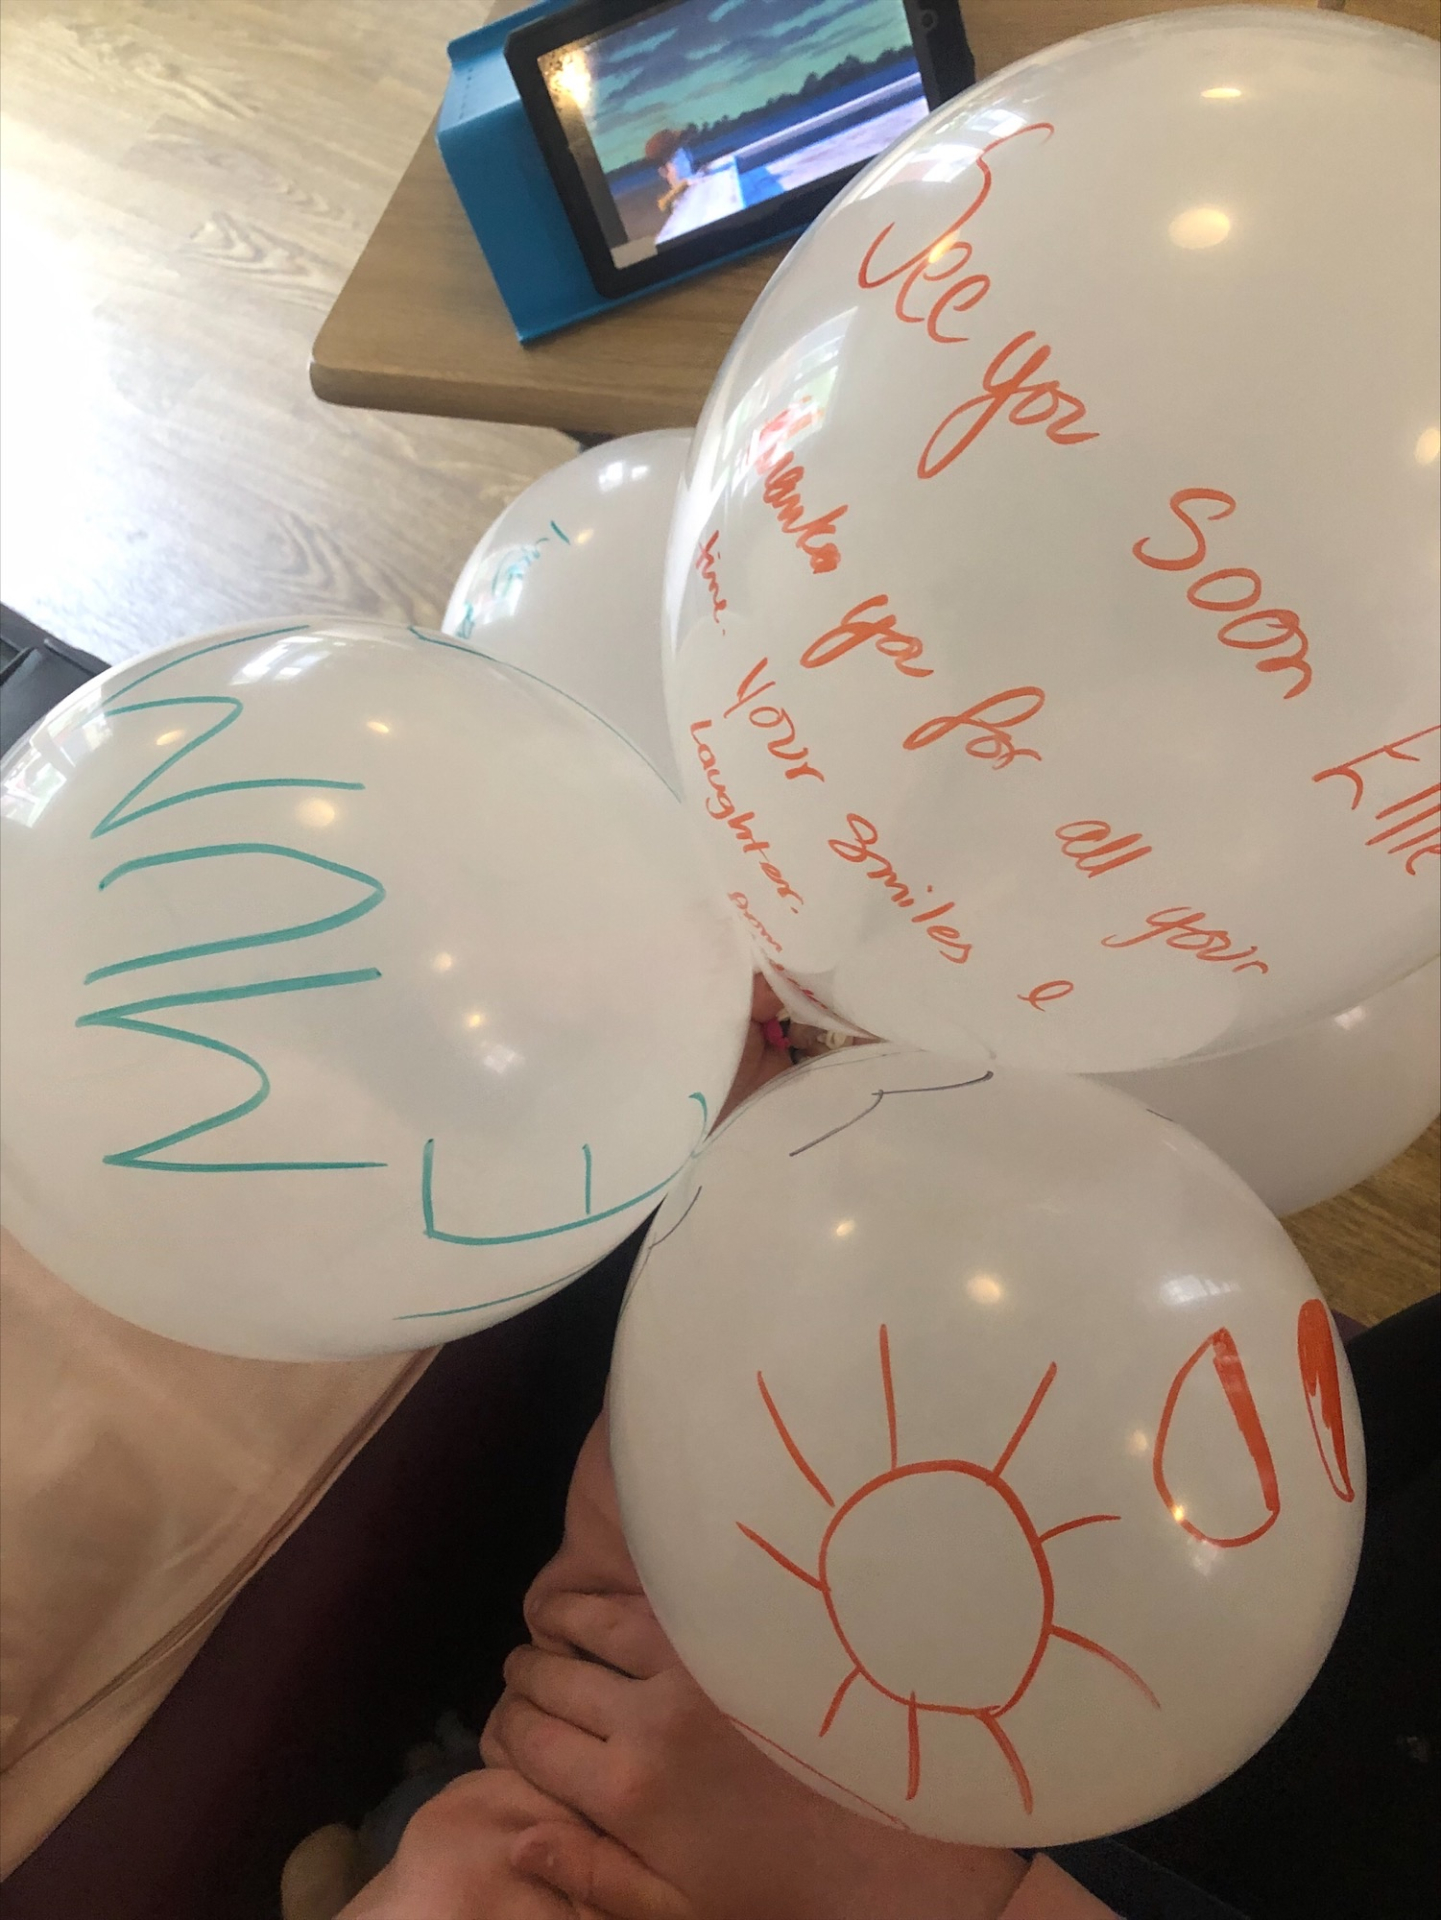 Balloons with thank you messages written on them